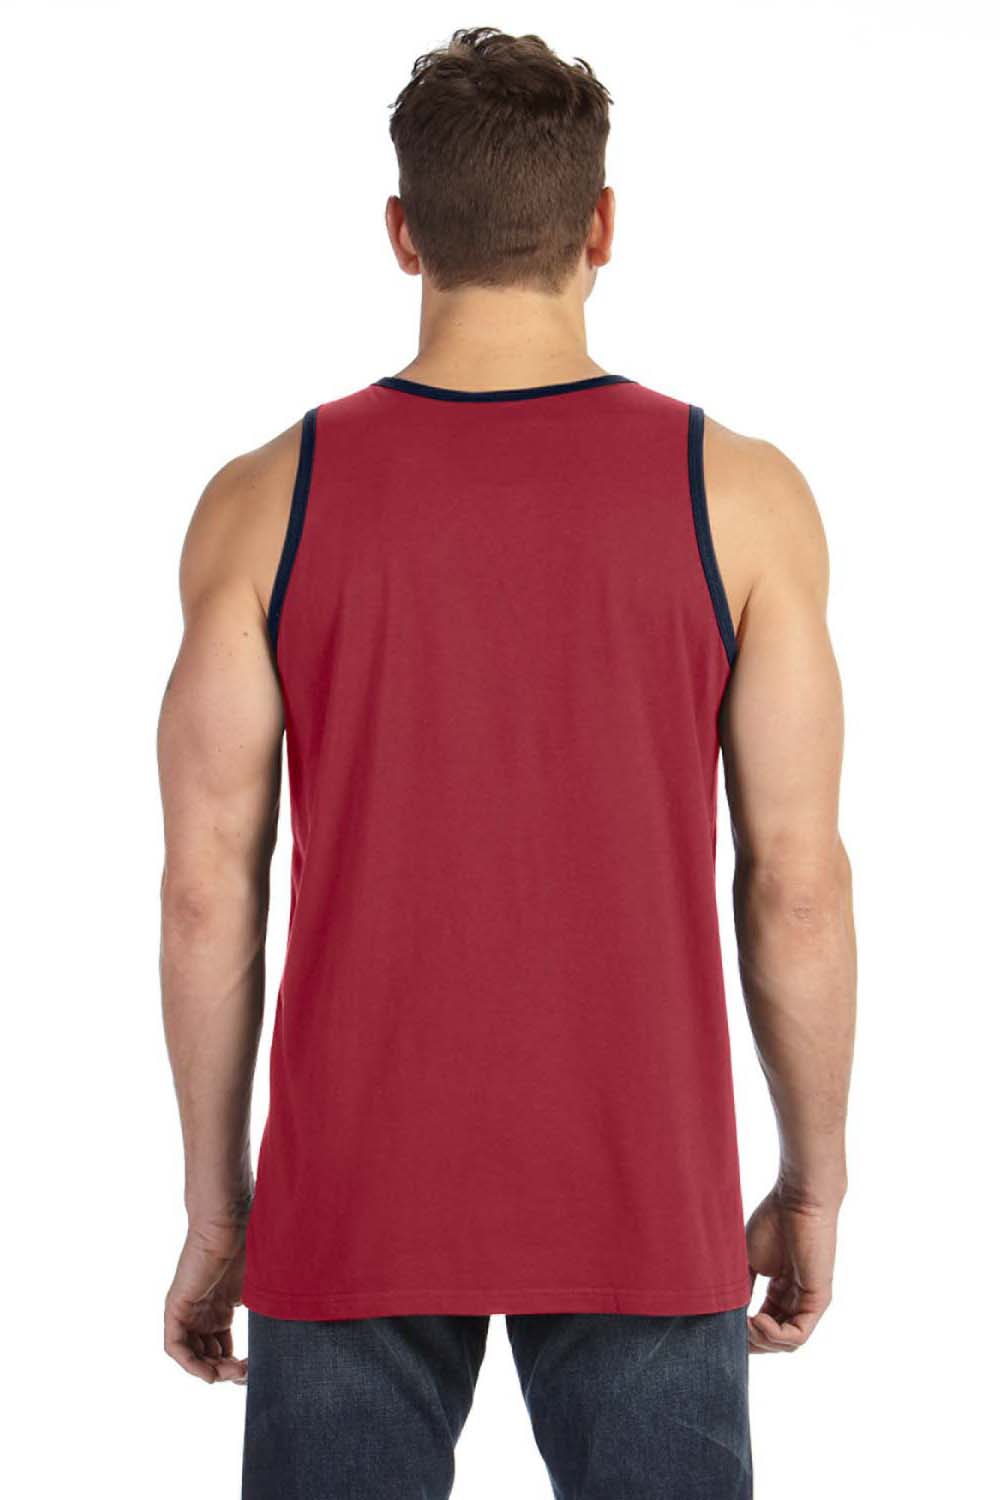 Anvil 986 Mens Independence Red/Navy Blue Tank Top —